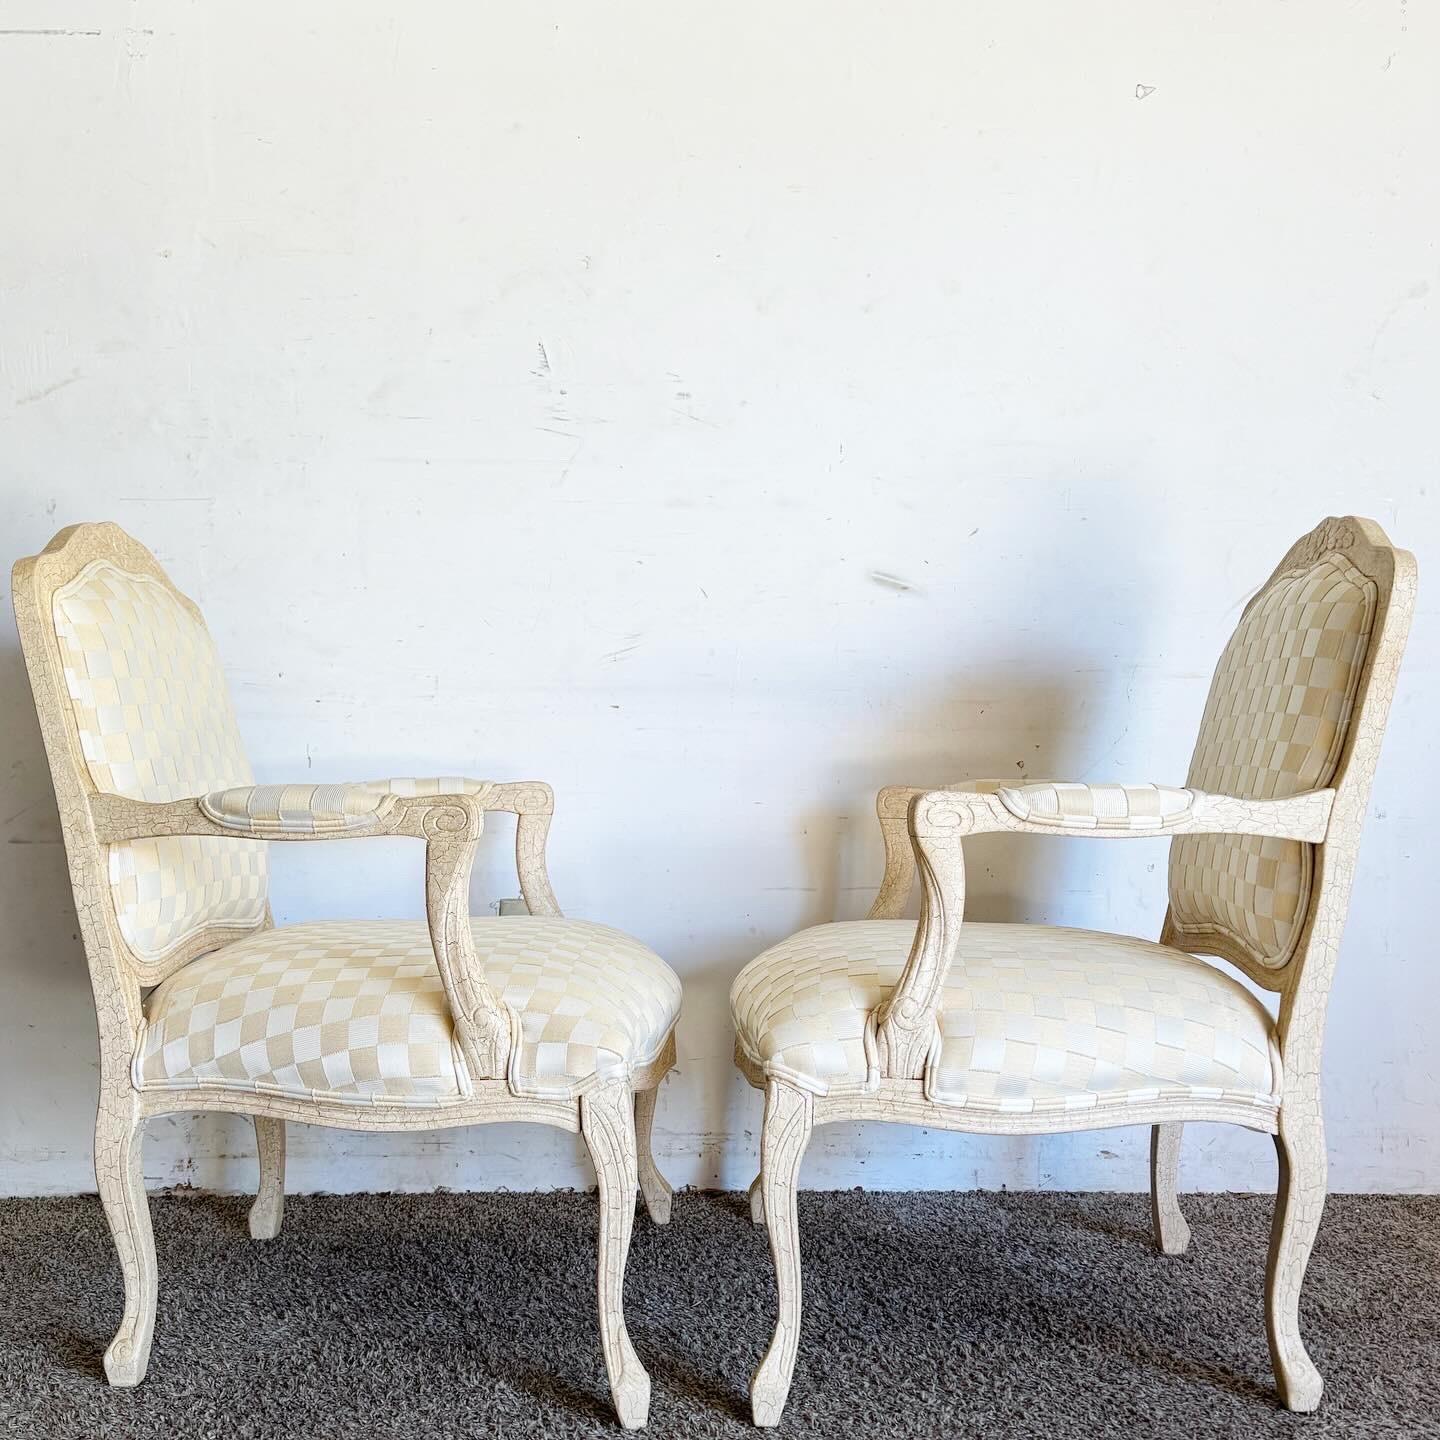 Vintage Regency Cream Crackled Finish Arm Chairs - a Pair For Sale 3